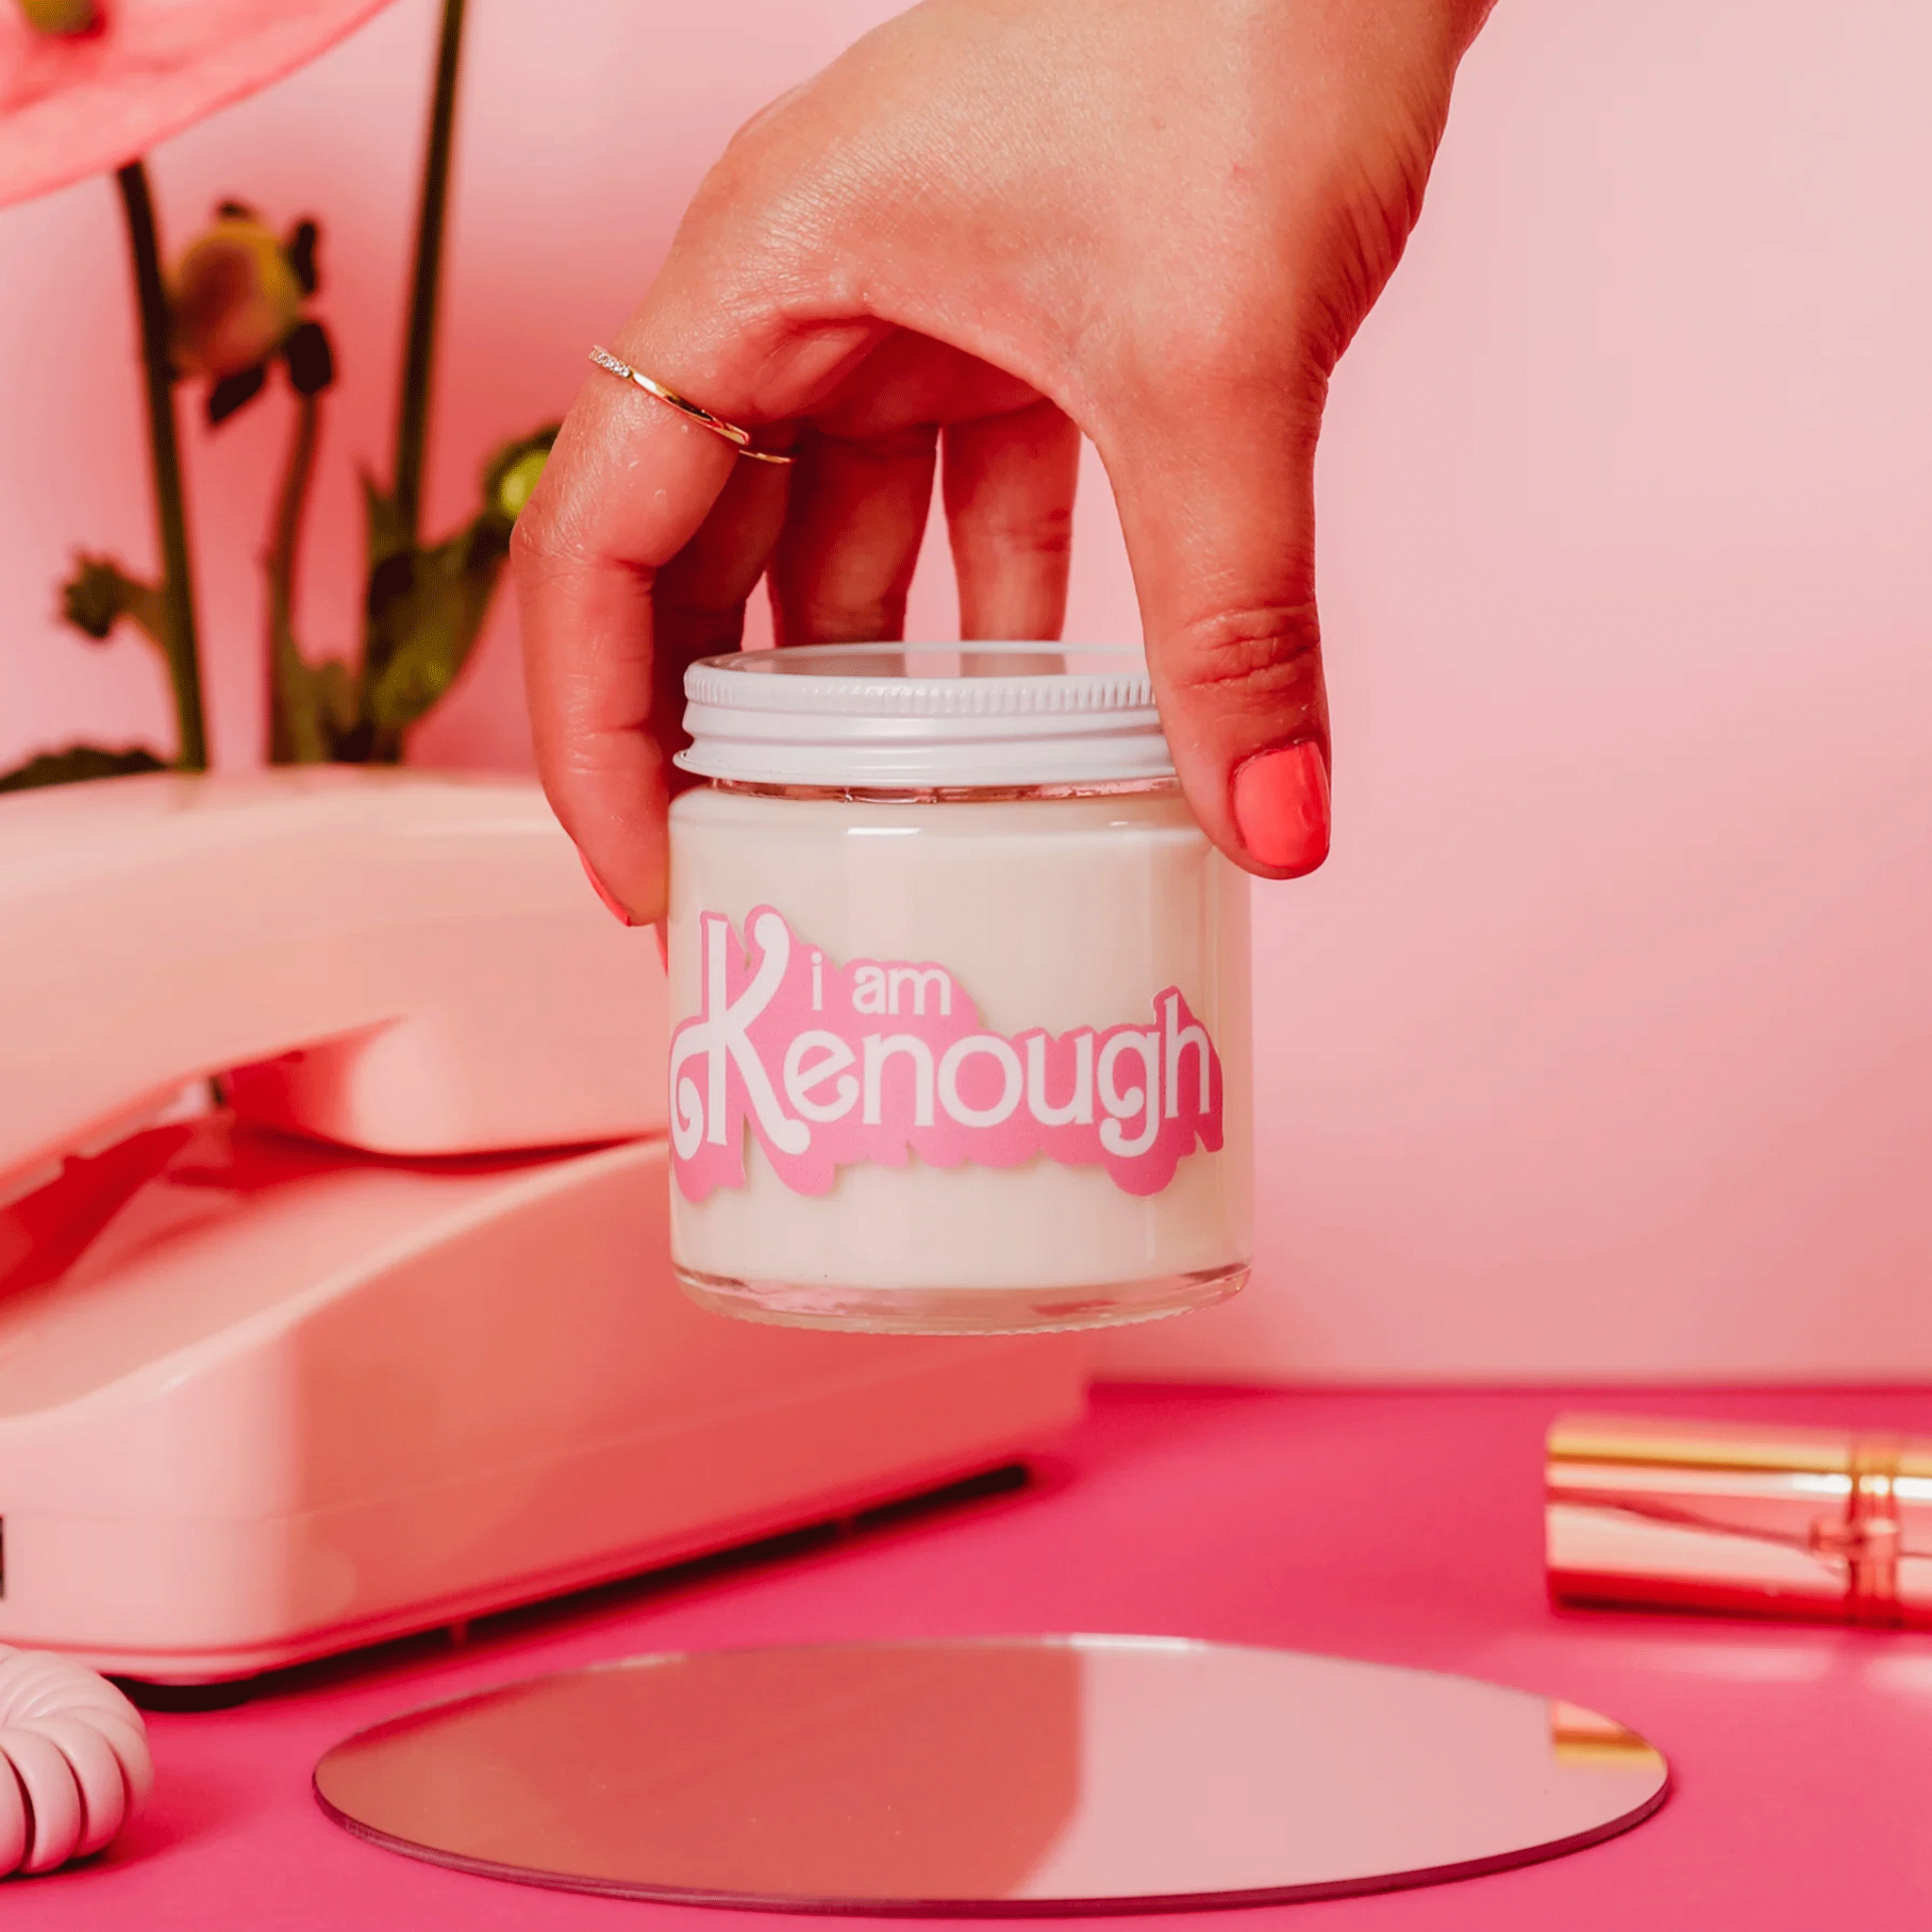 On a pink background is a model holding a glass candle with a white lid and pink text on the front that reads, "I am Kenough".